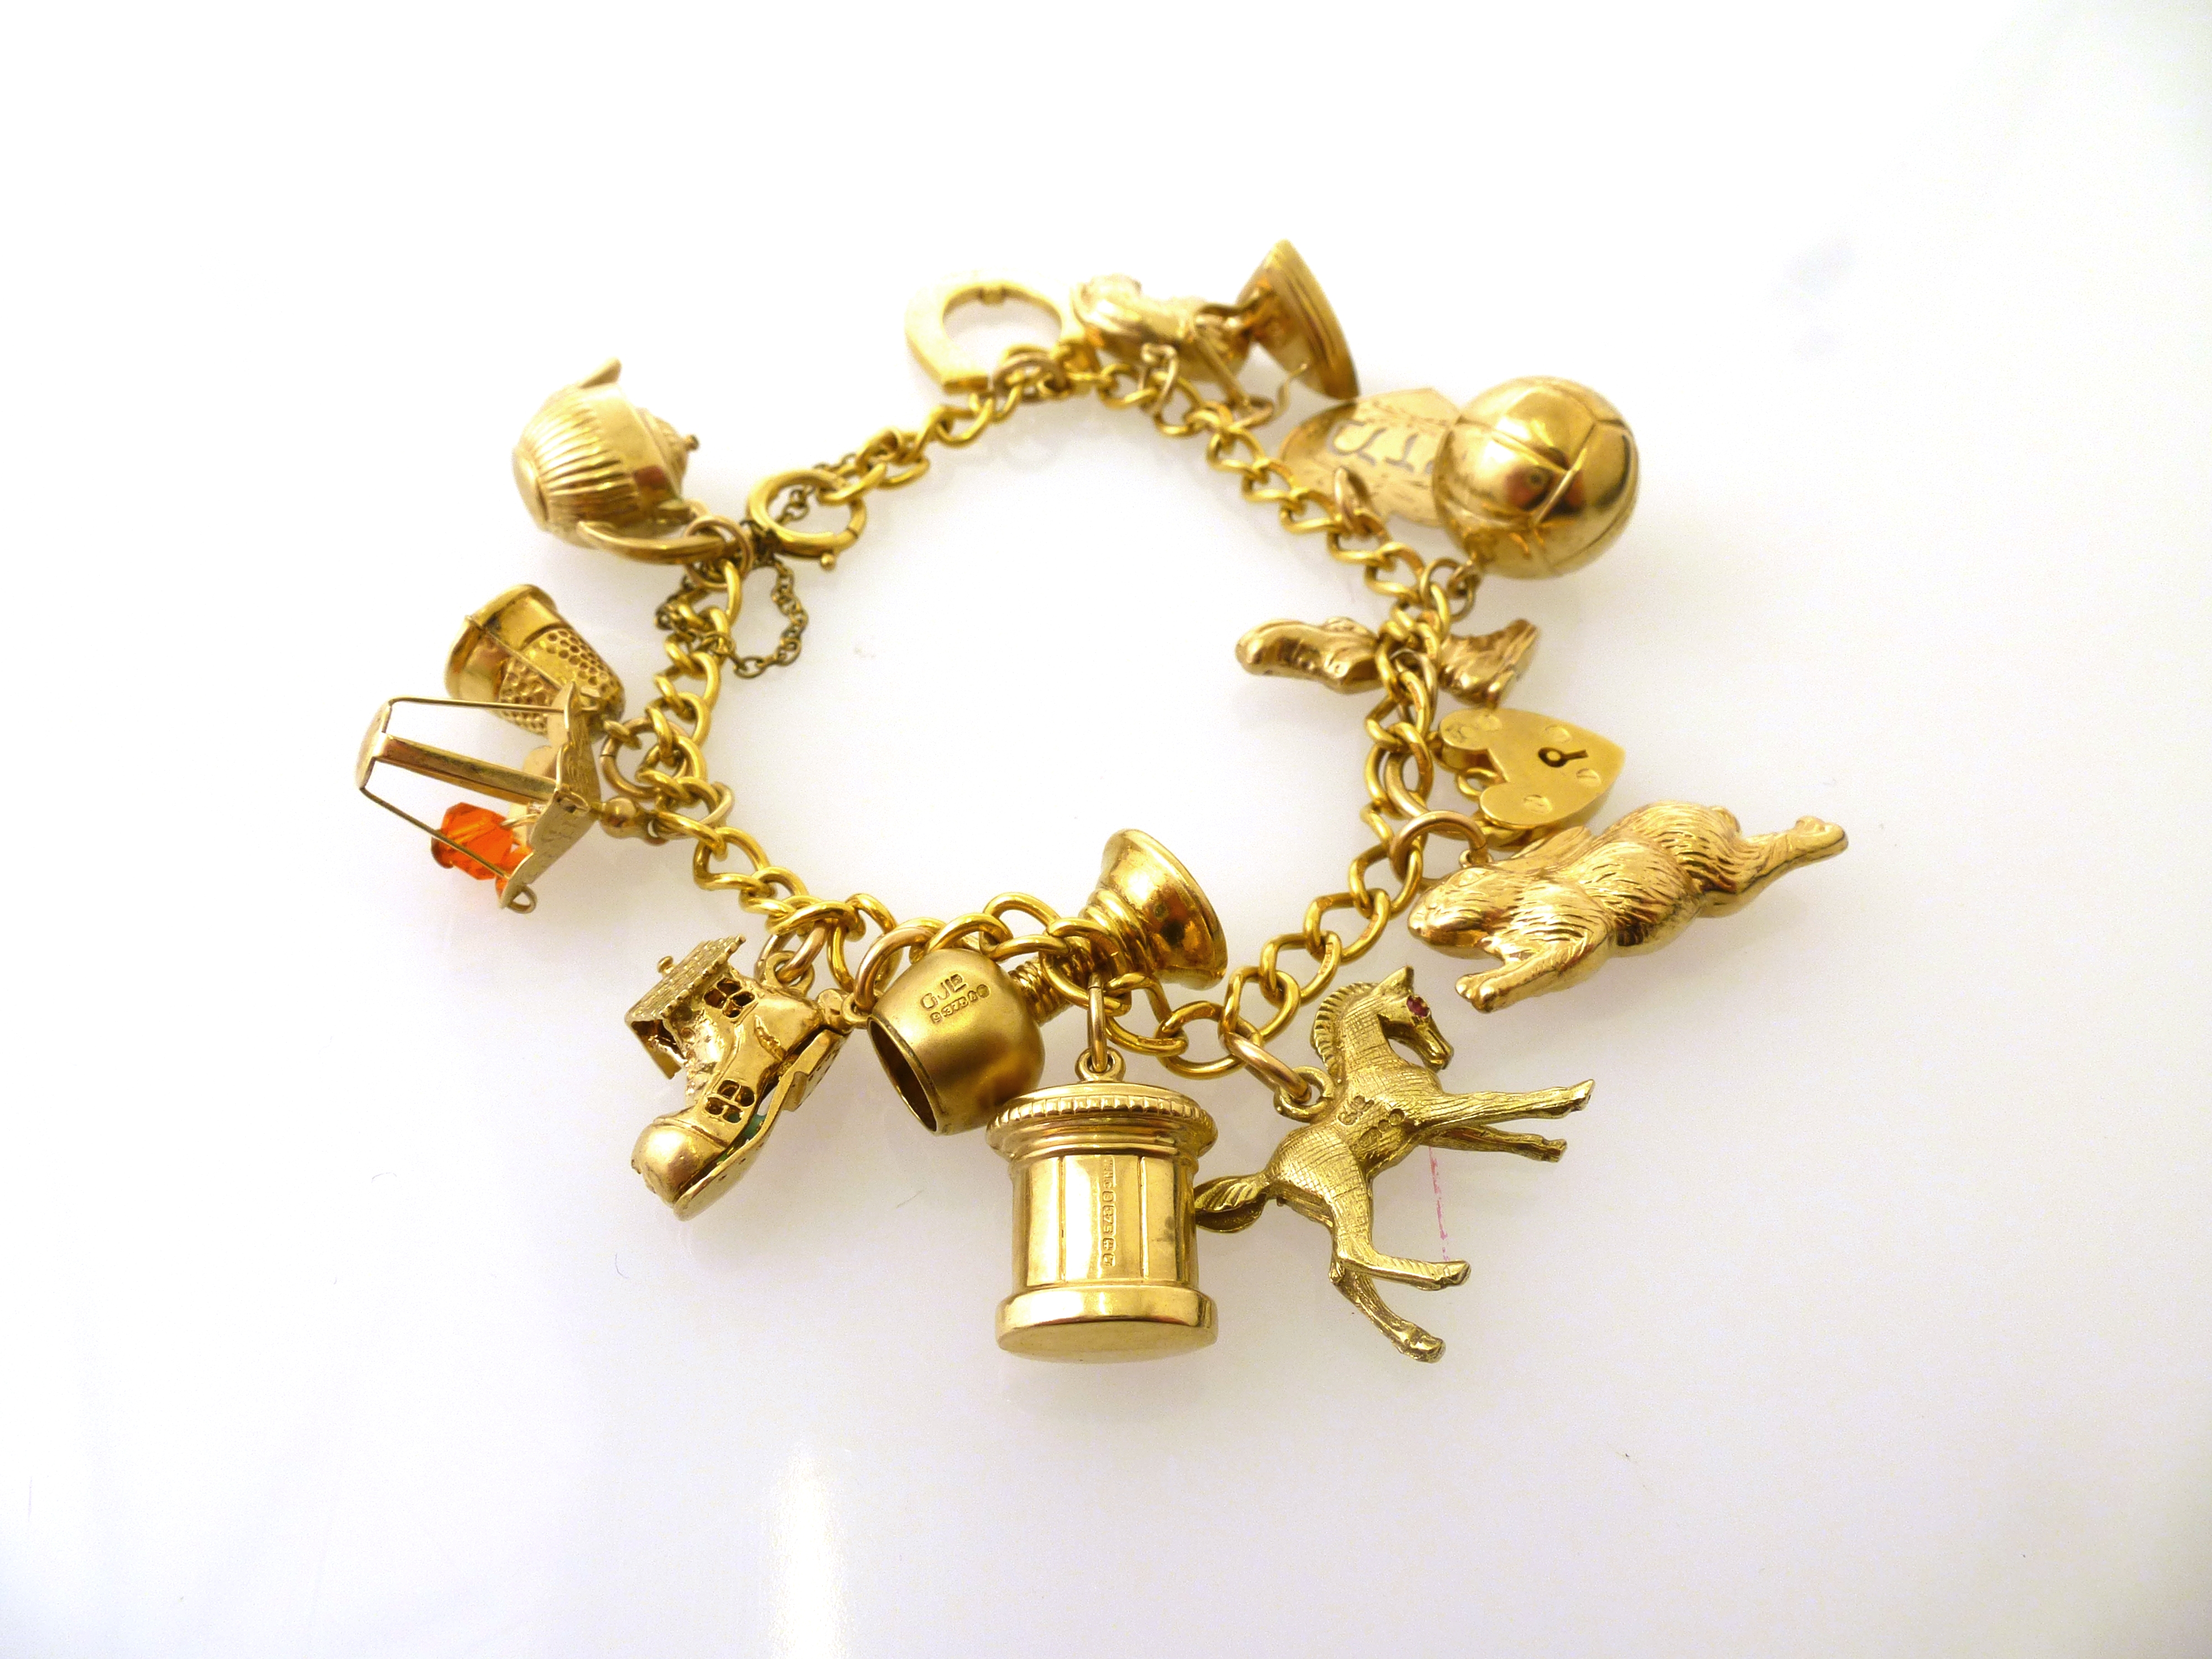 9K GOLD CHARM BRACELET WITH 15 9K GOLD CHARMS AND A 9K GOLD SAFETY CHAIN. 26G